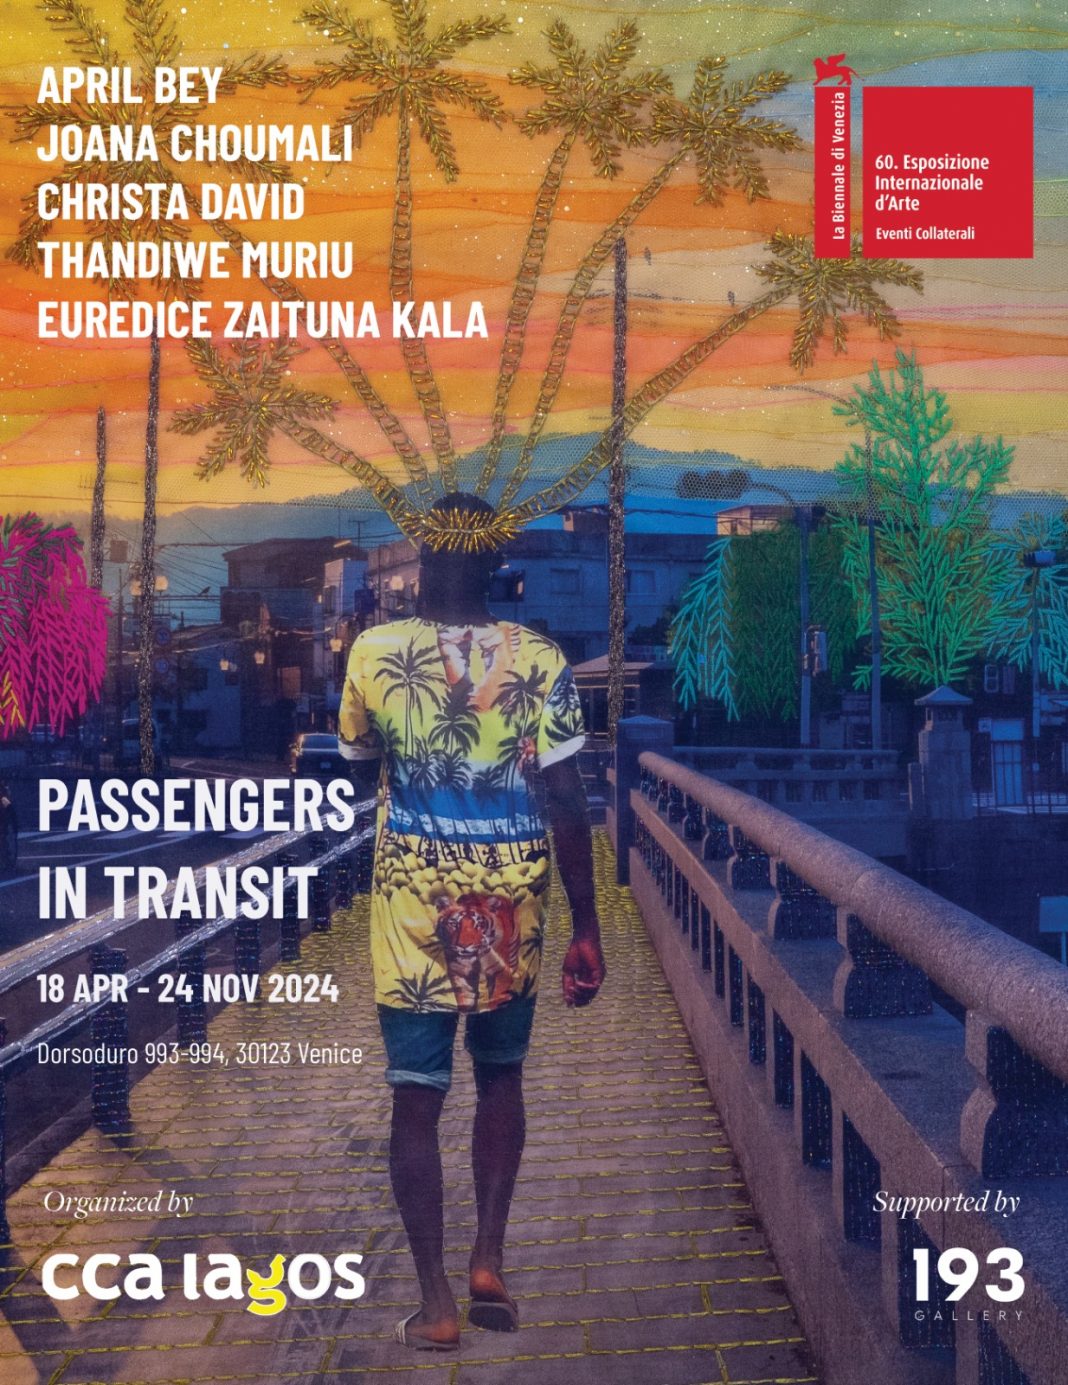 Passengers In Transithttps://www.exibart.com/repository/media/formidable/11/img/8a6/Passengers-in-Transit_official-poster_rectangle_galleria193-1068x1385.jpeg